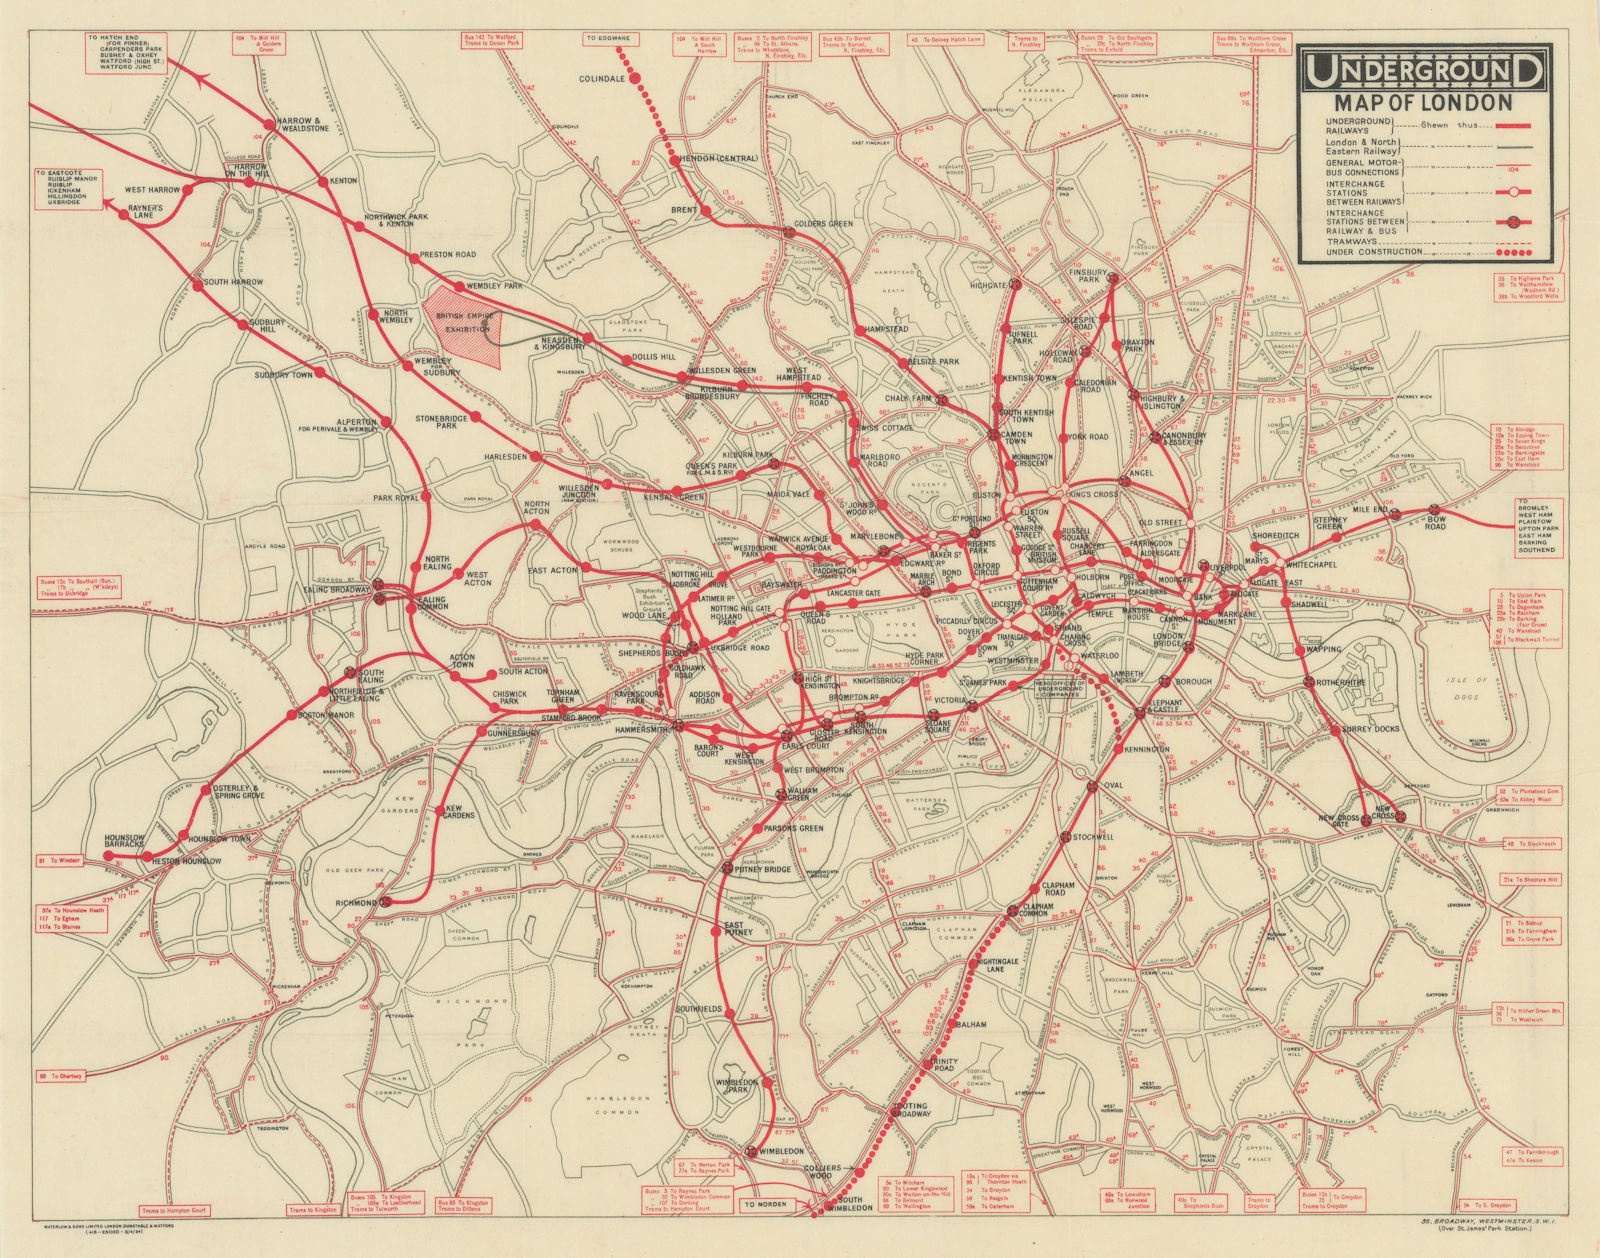 Associate Product Underground Map of London. Tube network. Print code 419-25000-3/4/24. April 1924